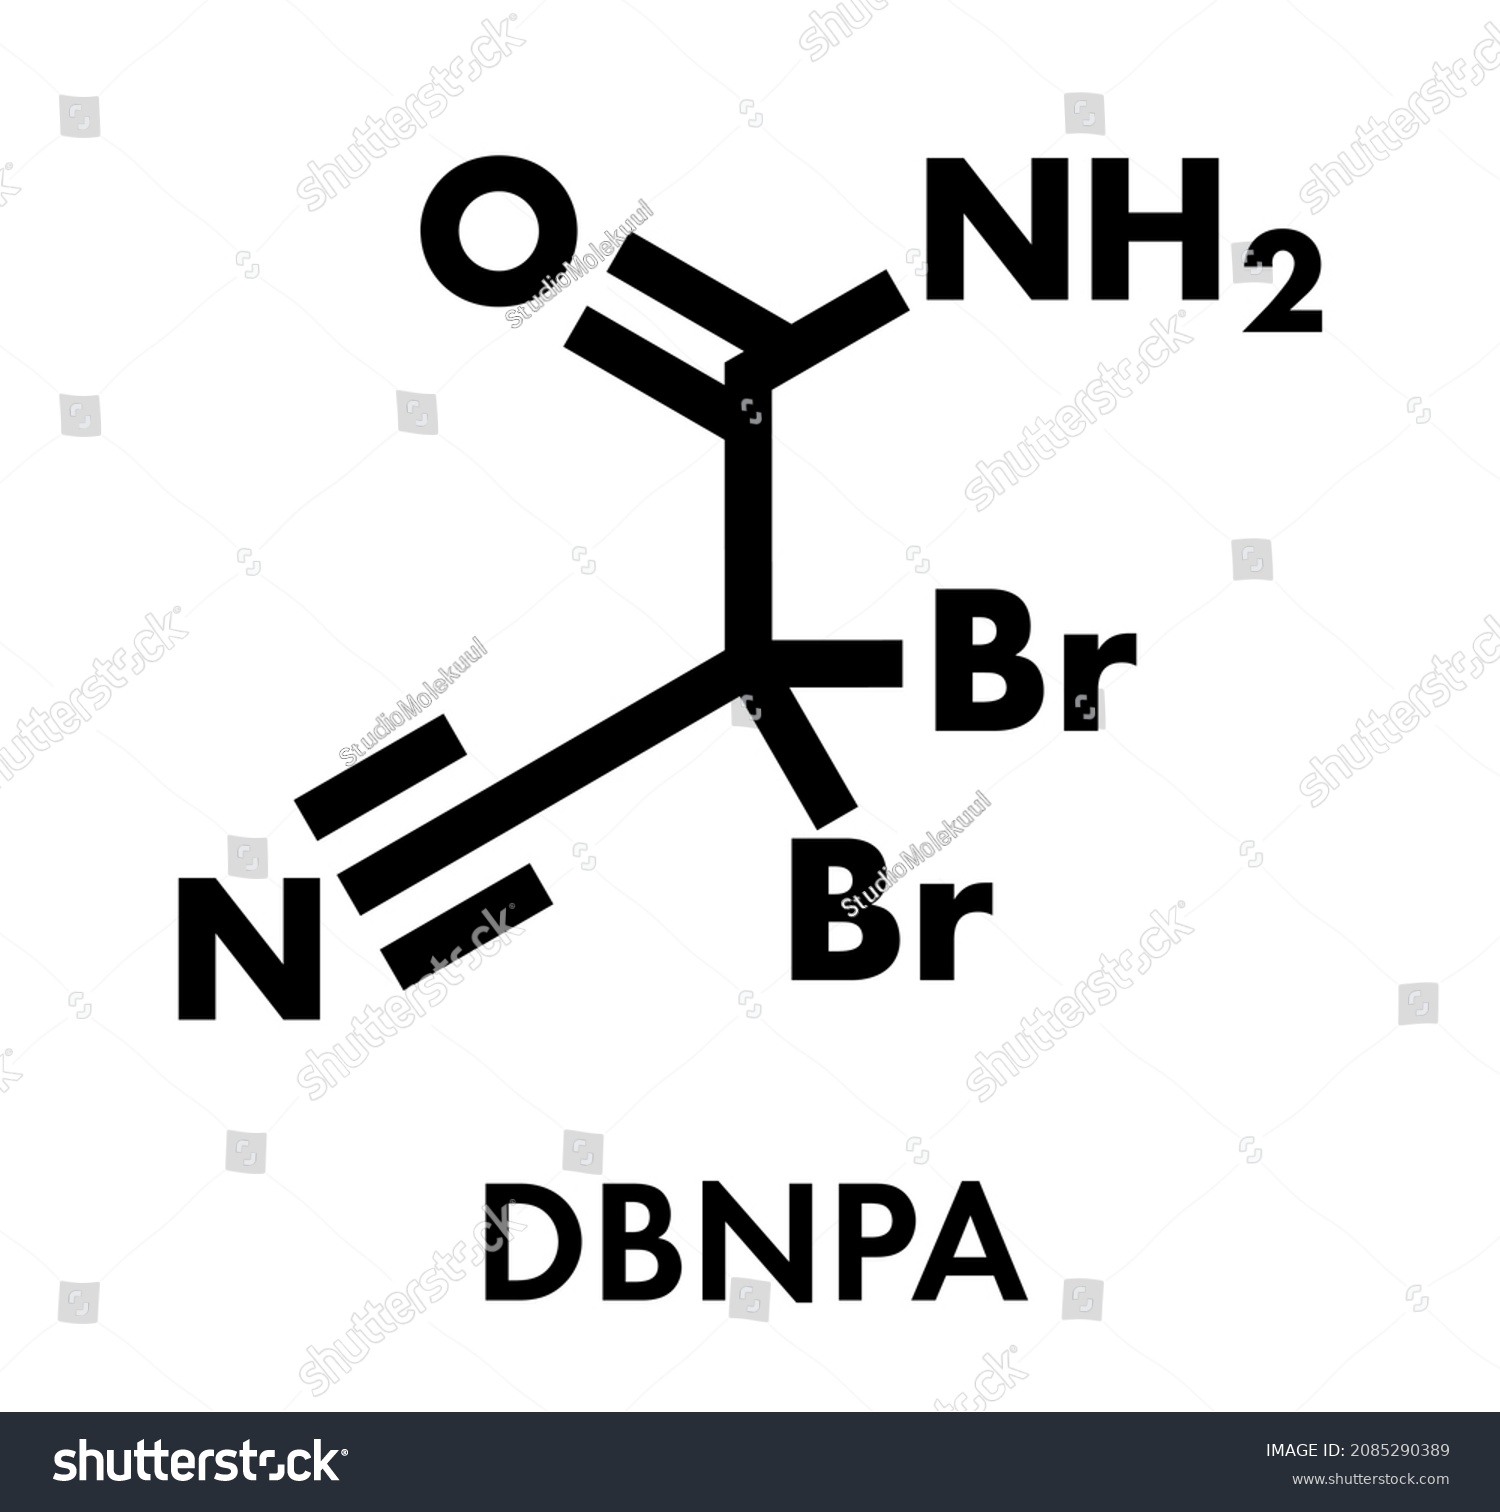 SVG of DBNPA (2,2-dibromo-3-nitrilopropionamide) biocide, chemical structure. Quick-kill biocide that rapidly breaks down in water. Skeletal formula. svg